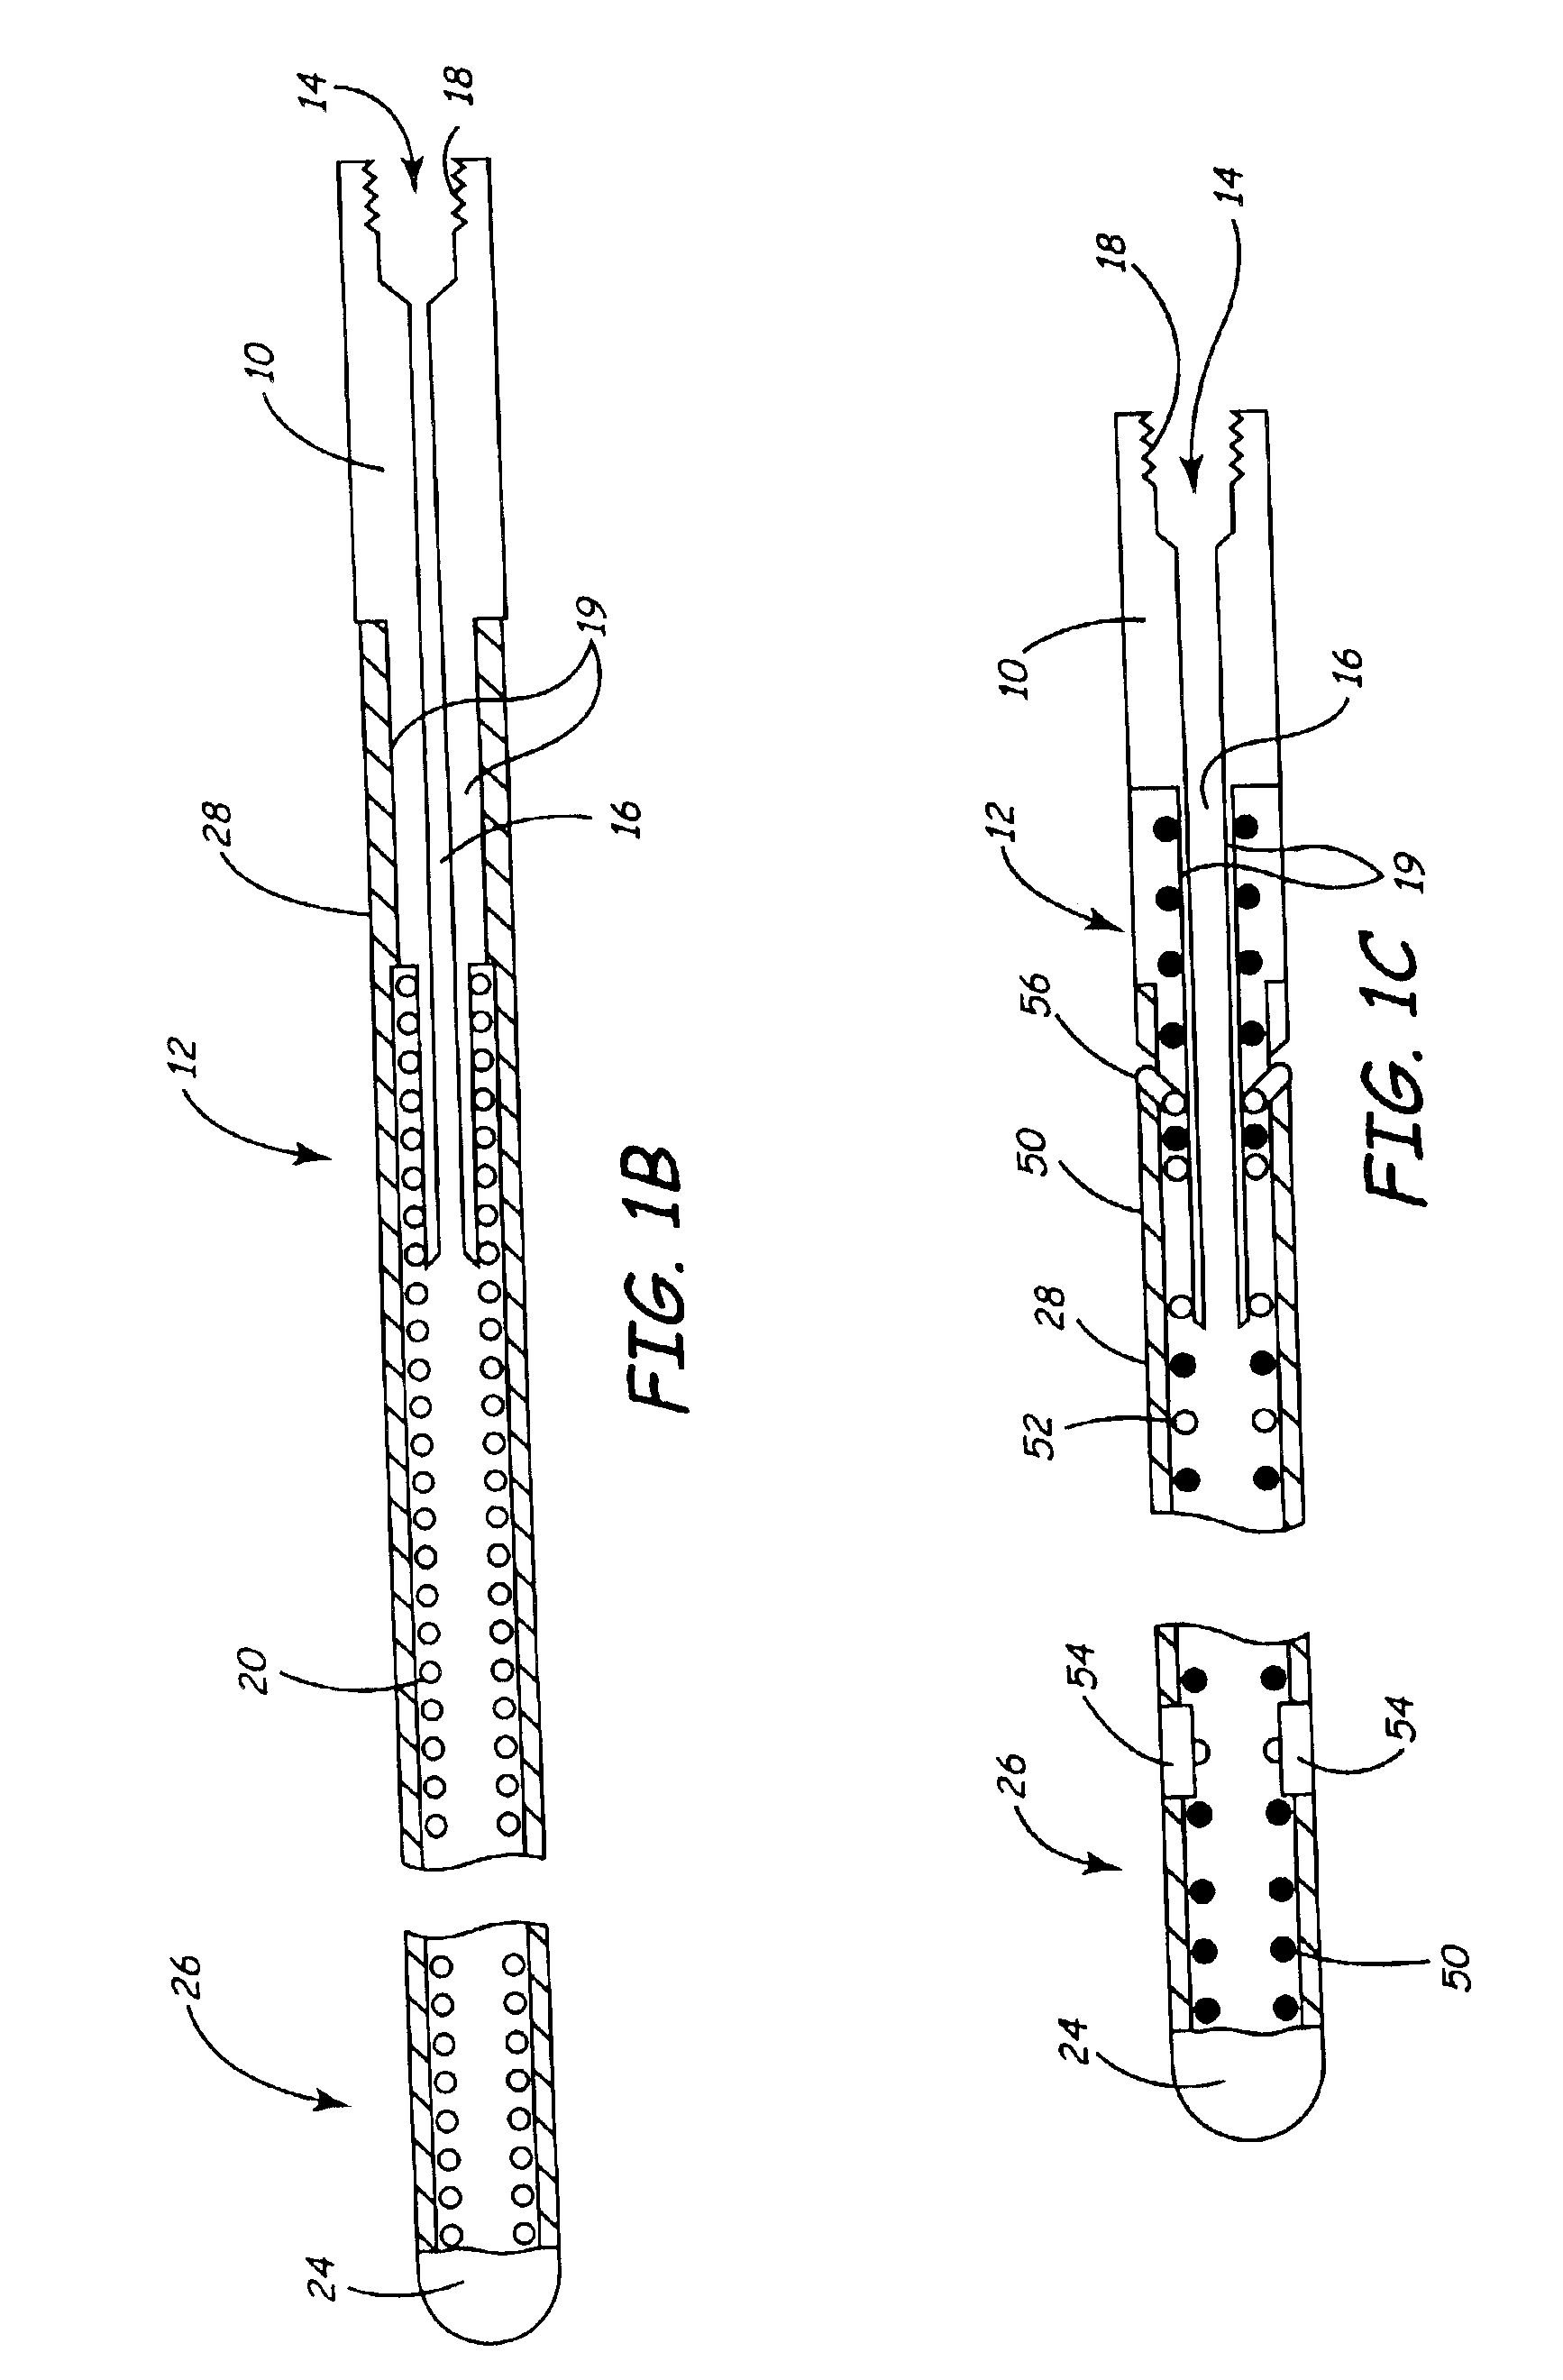 Medical electrical lead connector arrangement including anti-rotation means